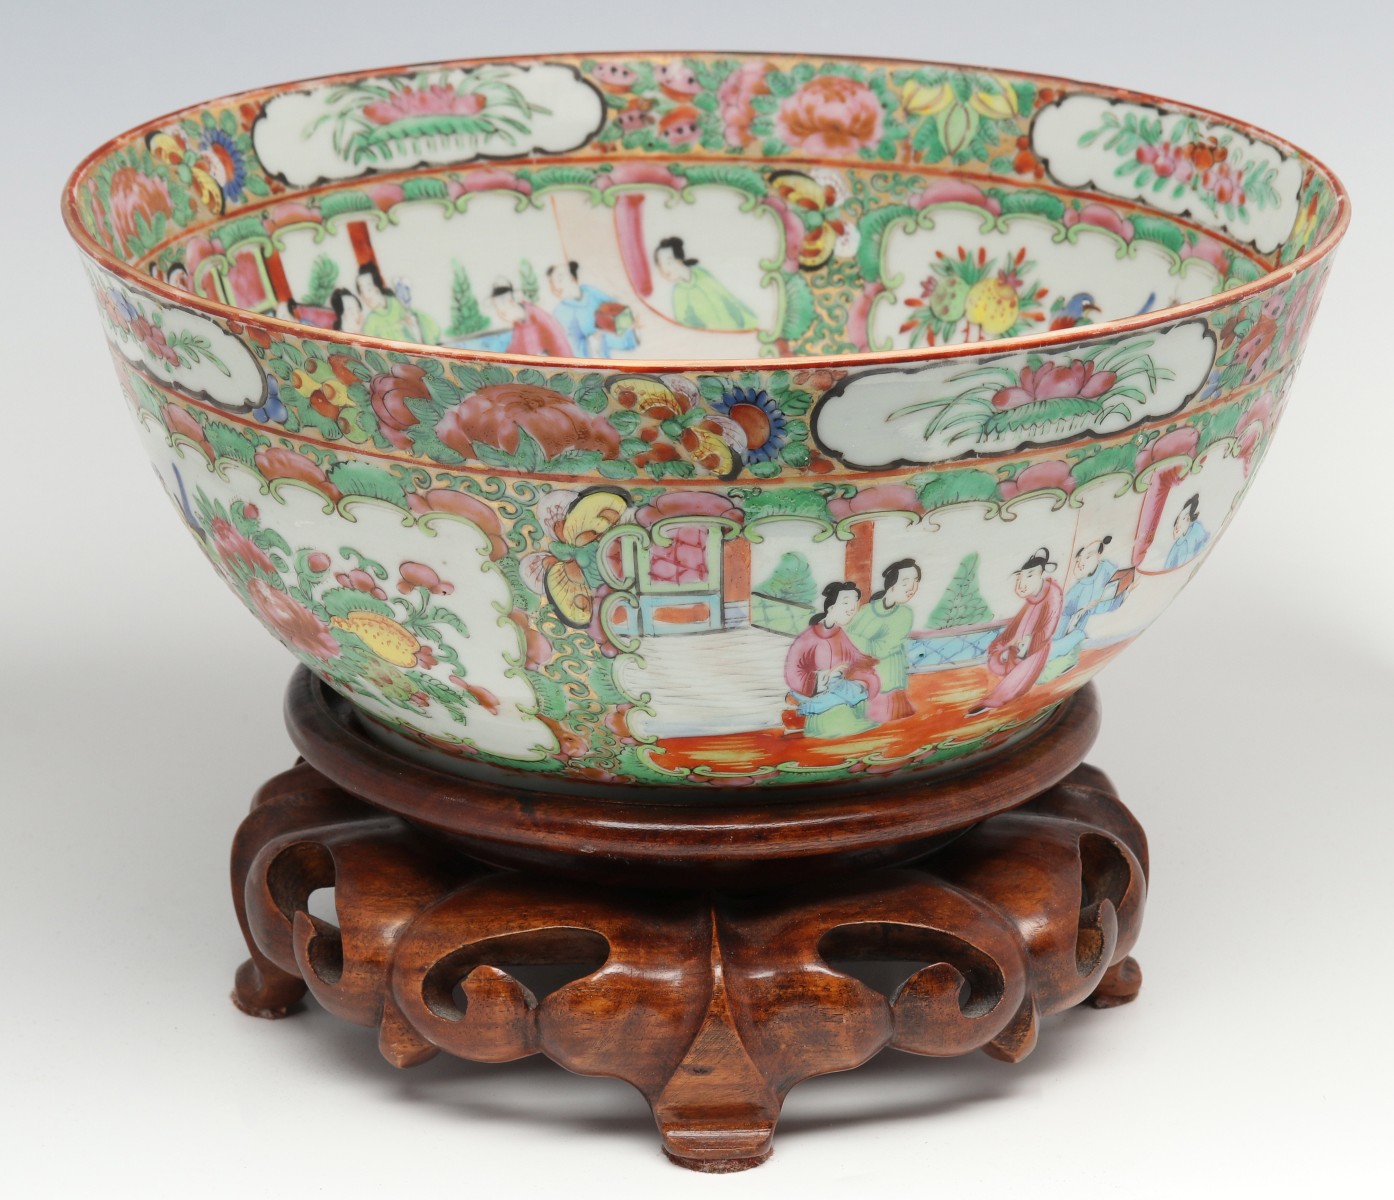 A LARGE CHINESE EXPORT ROSE MEDALLION PUNCH BOWL